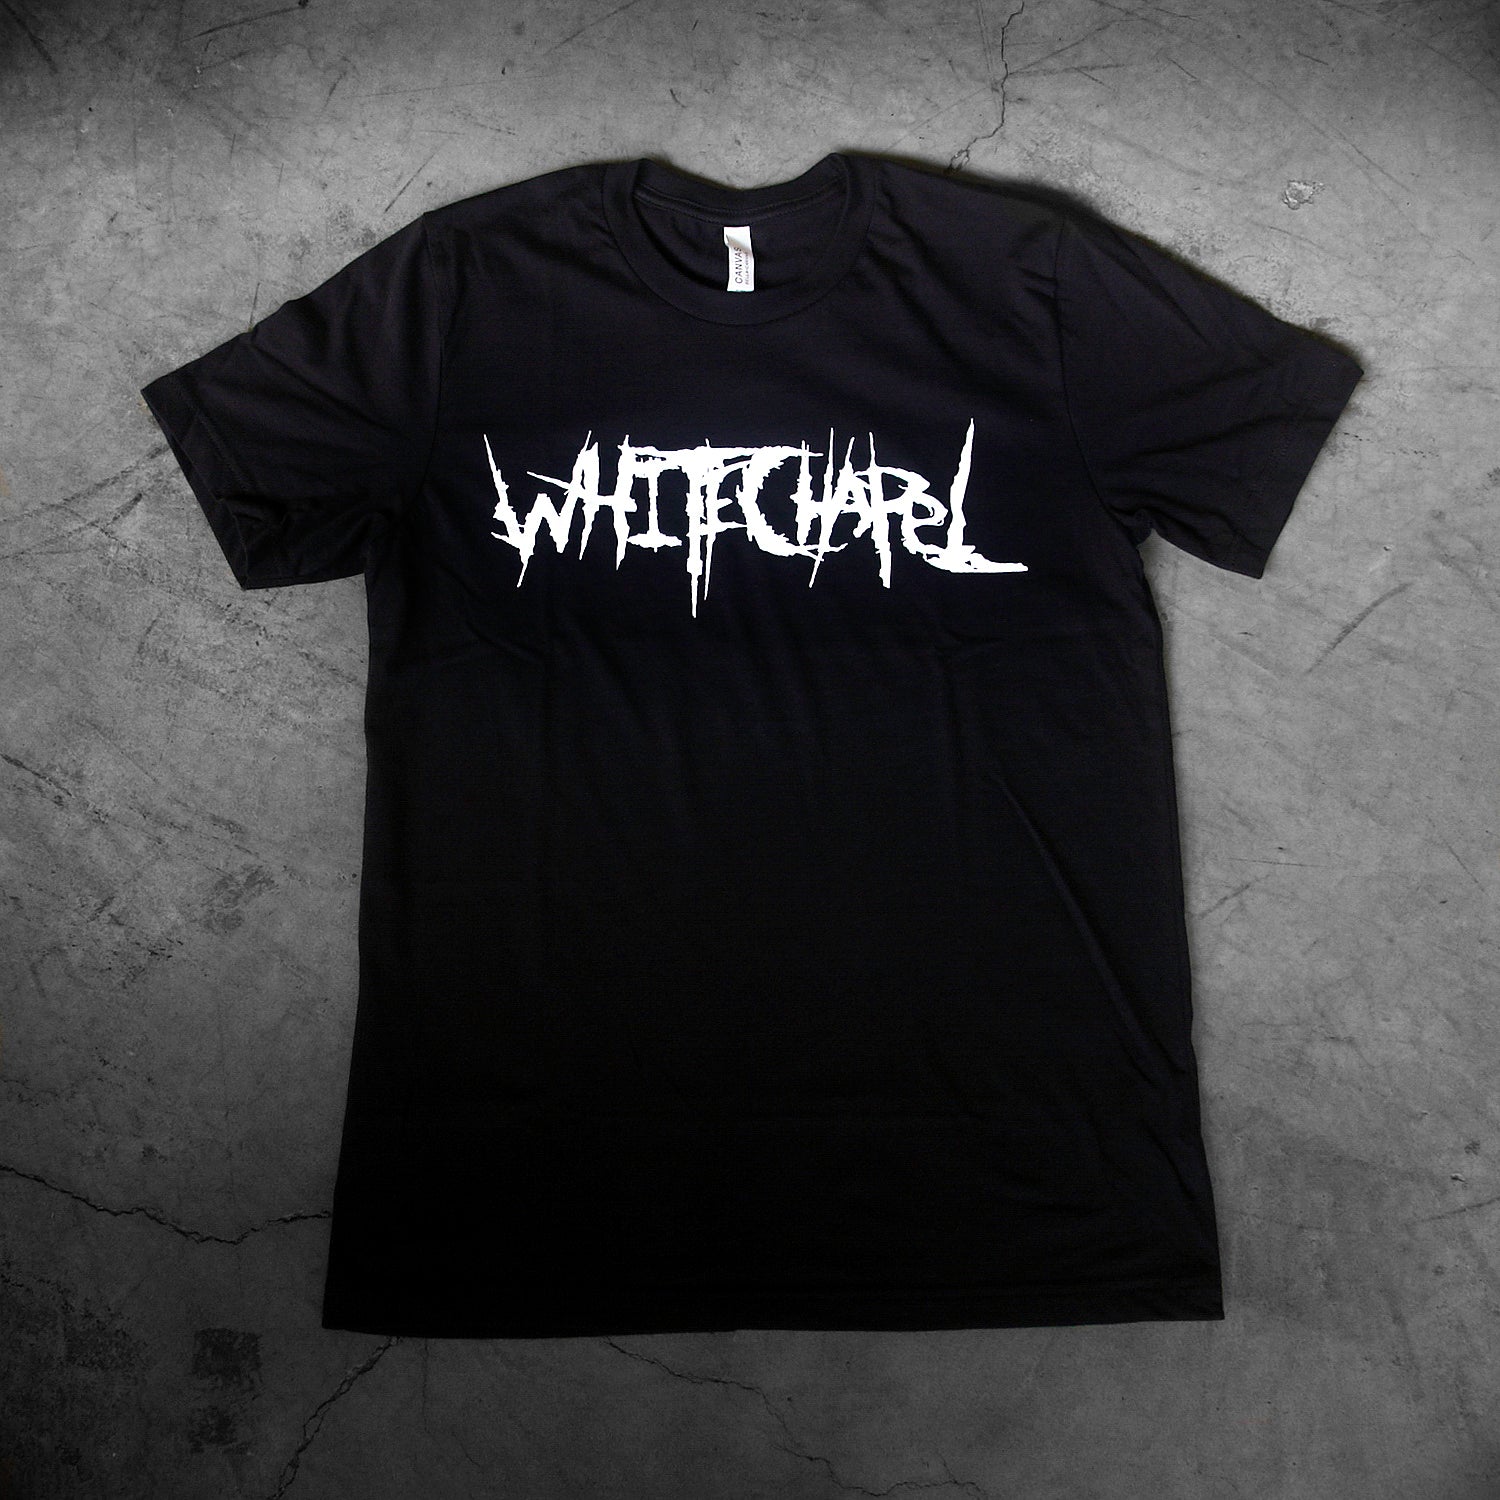 image of a black tee shirt laid flat on a concrete floor. tee has center chest print in white that says whitechapel